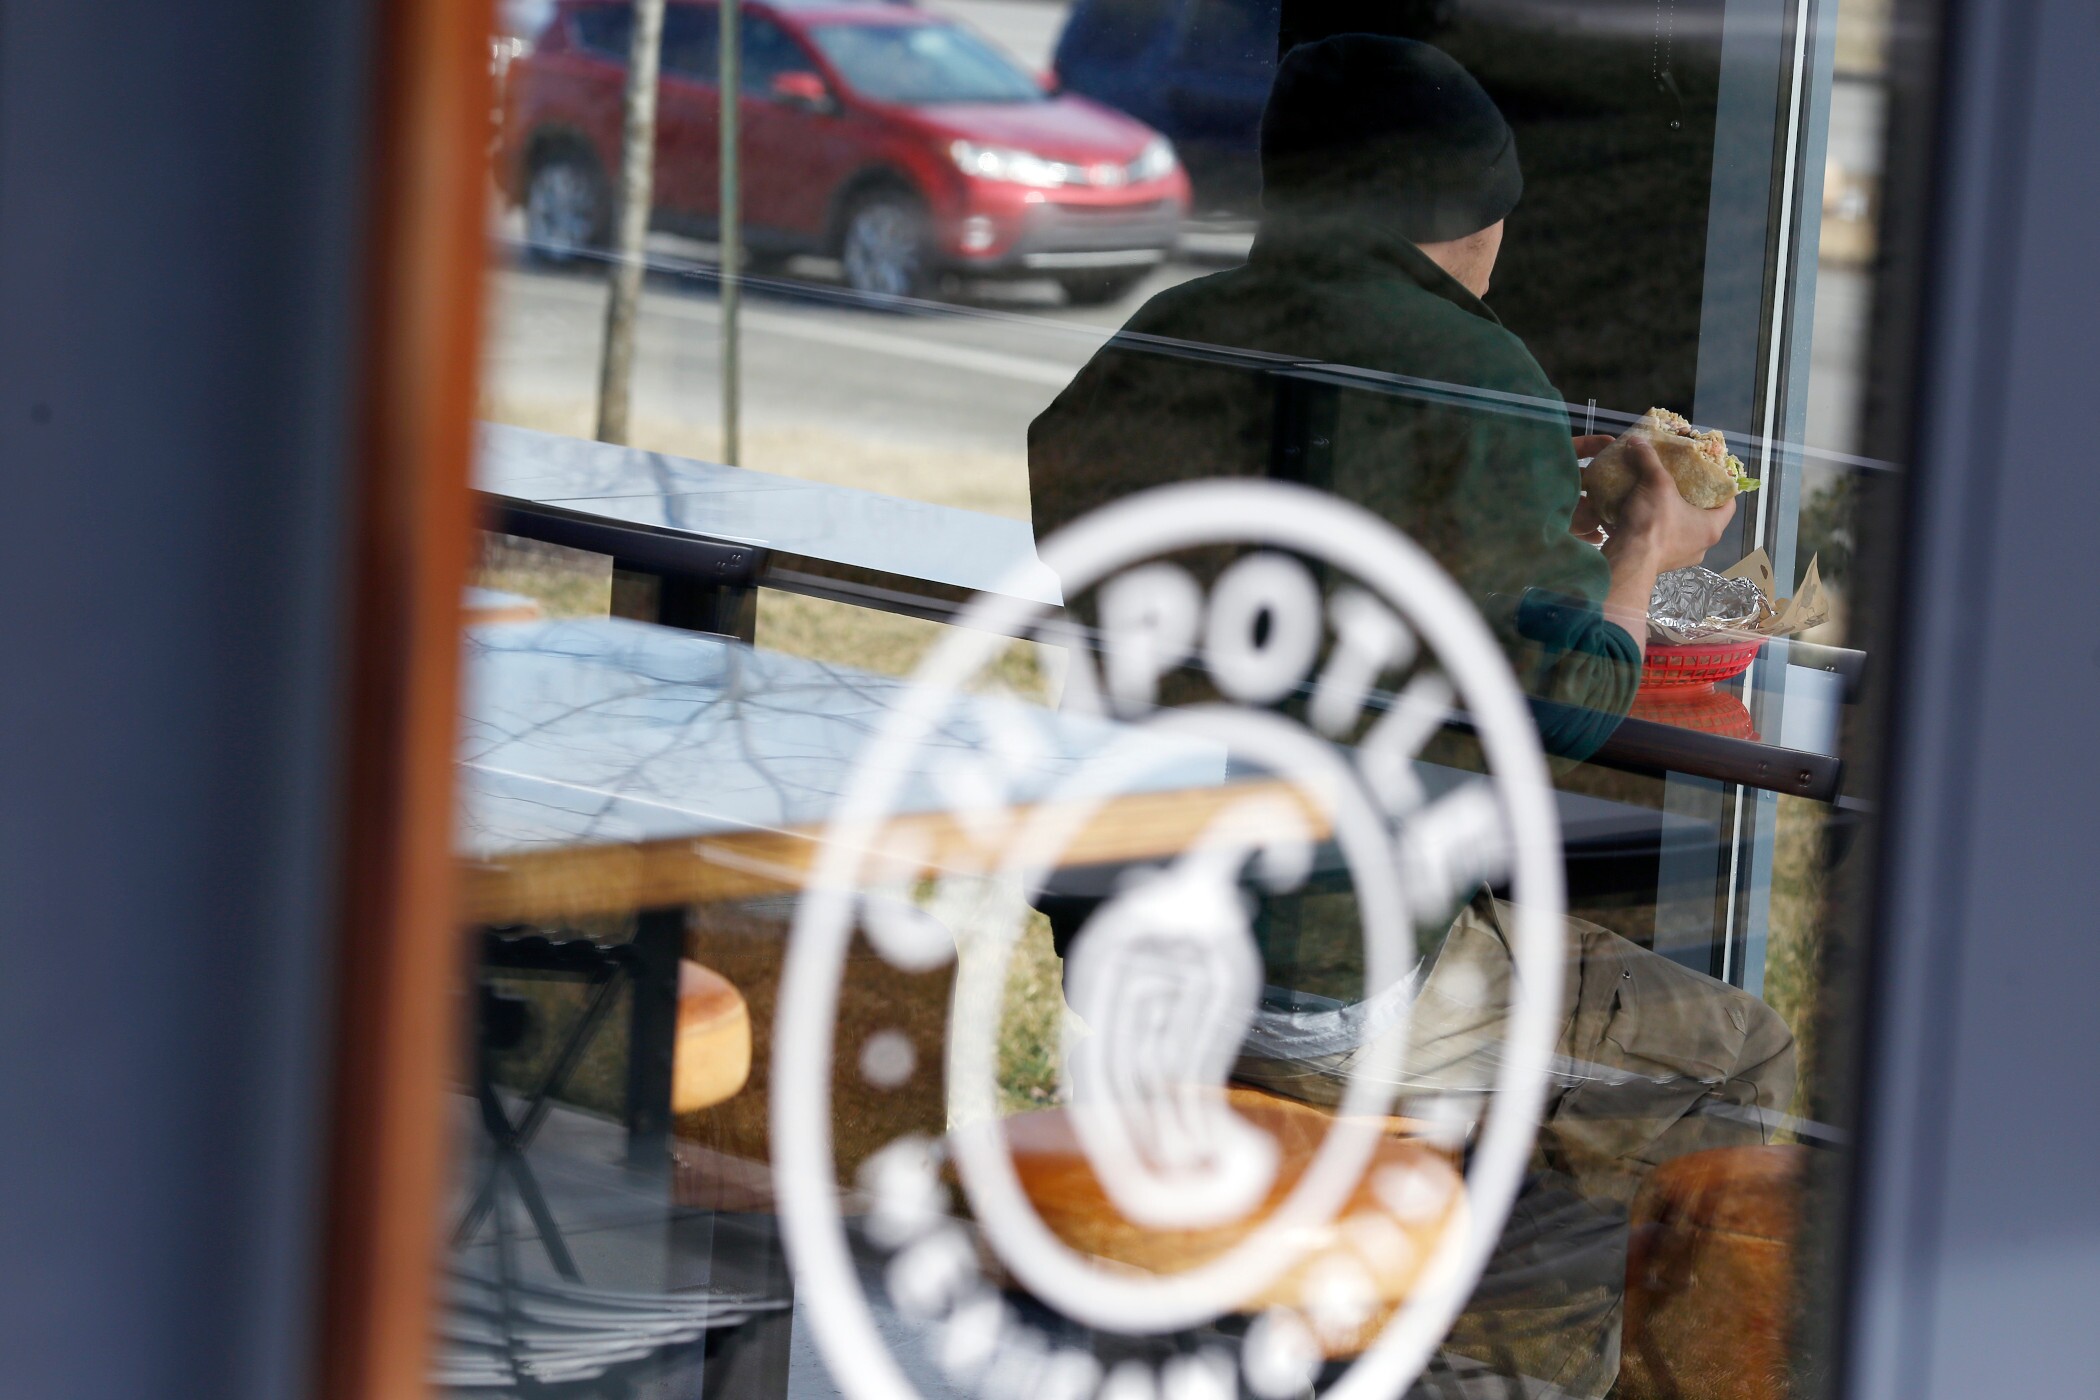 A Chipotle location in the United States. (Getty Images)